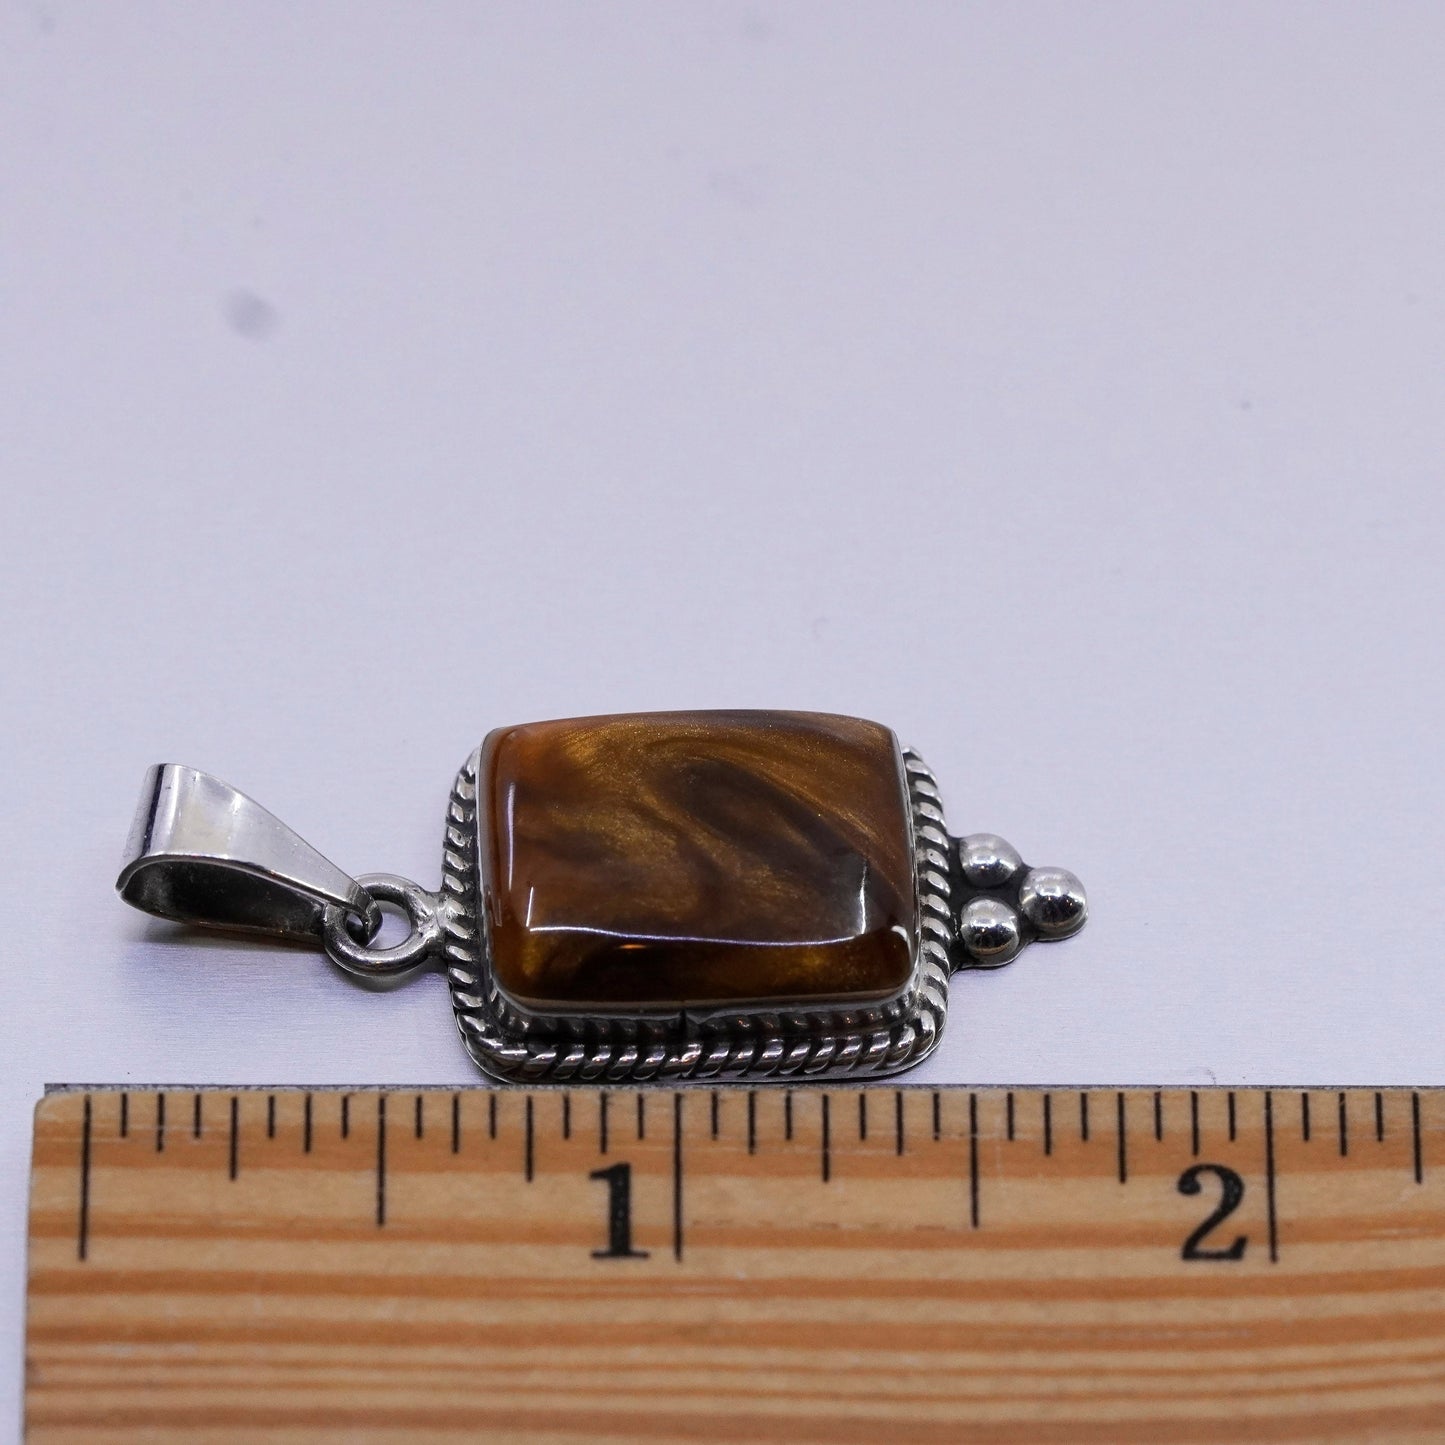 antique sterling 925 silver handmade pendant with glittering goldstone